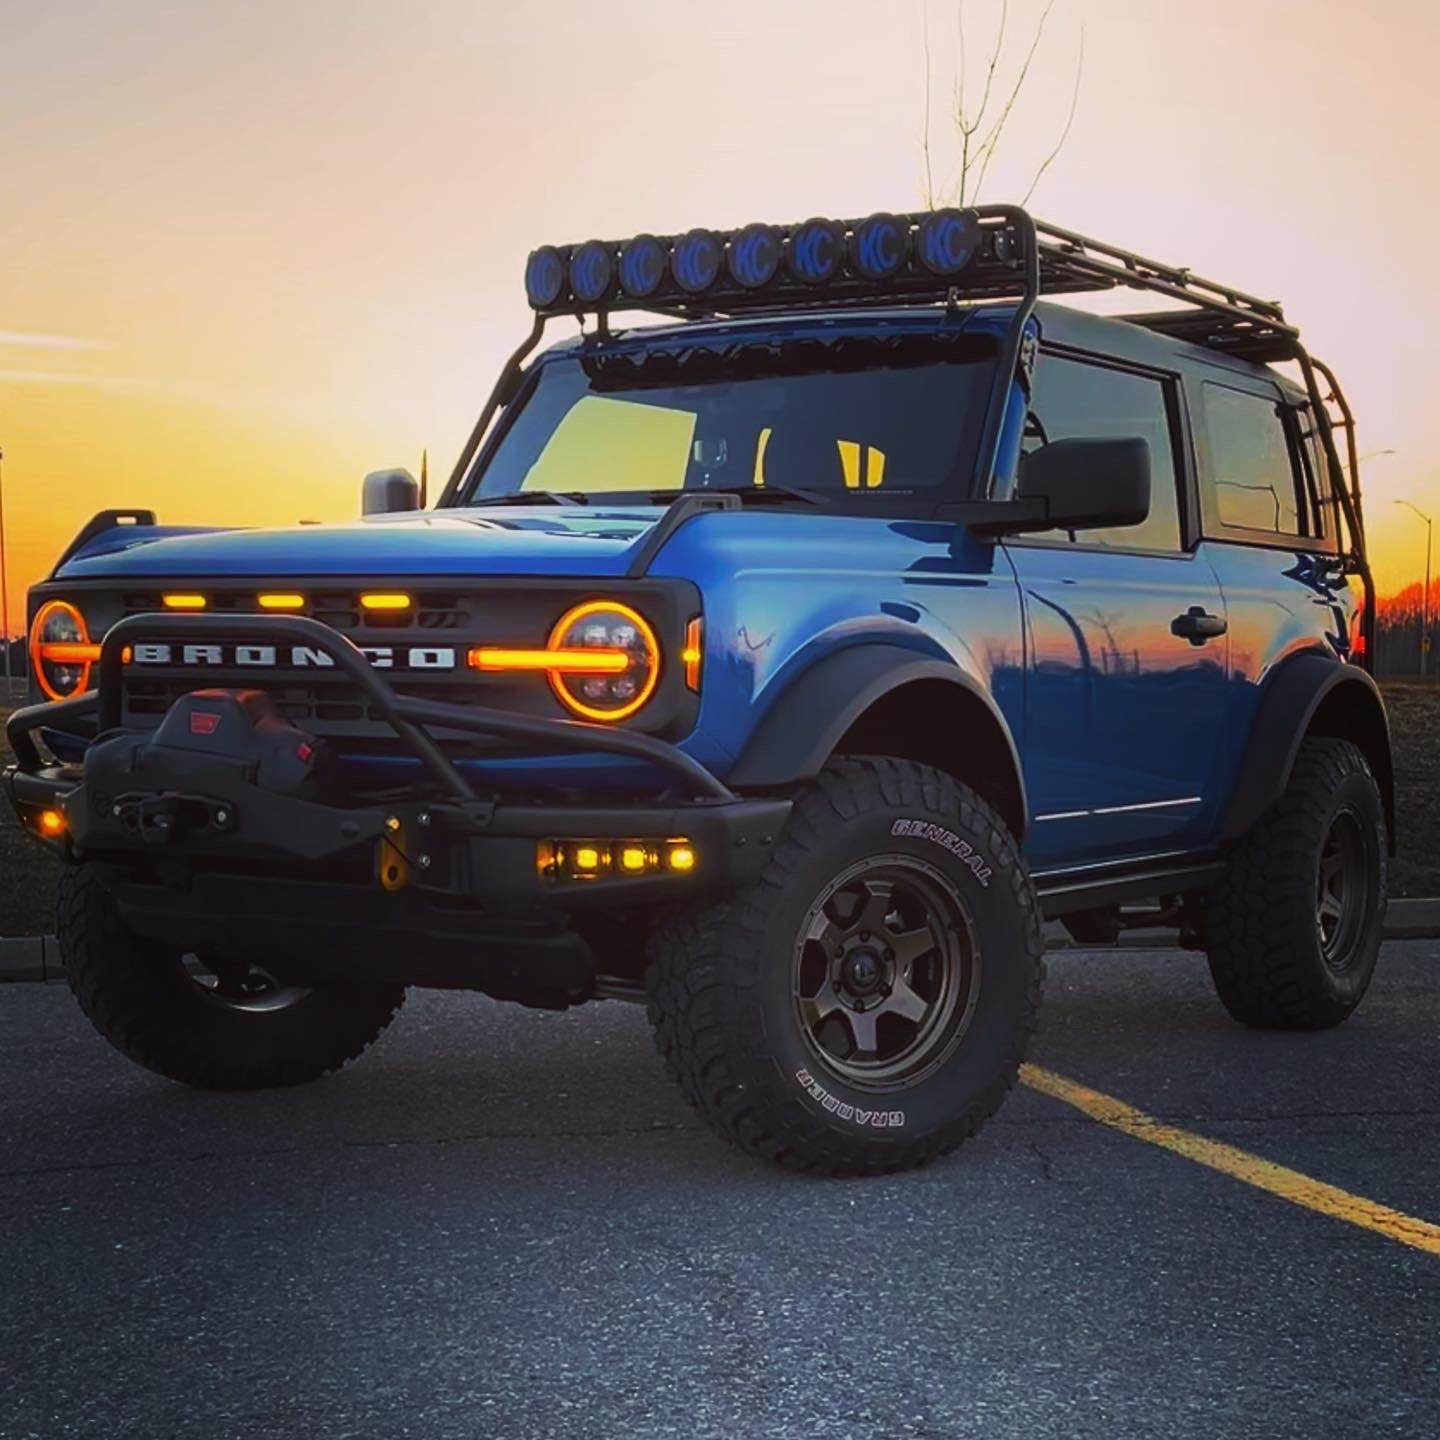 Ford Bronco GOBI Racks in the Wild - Post Your Photos unnamed